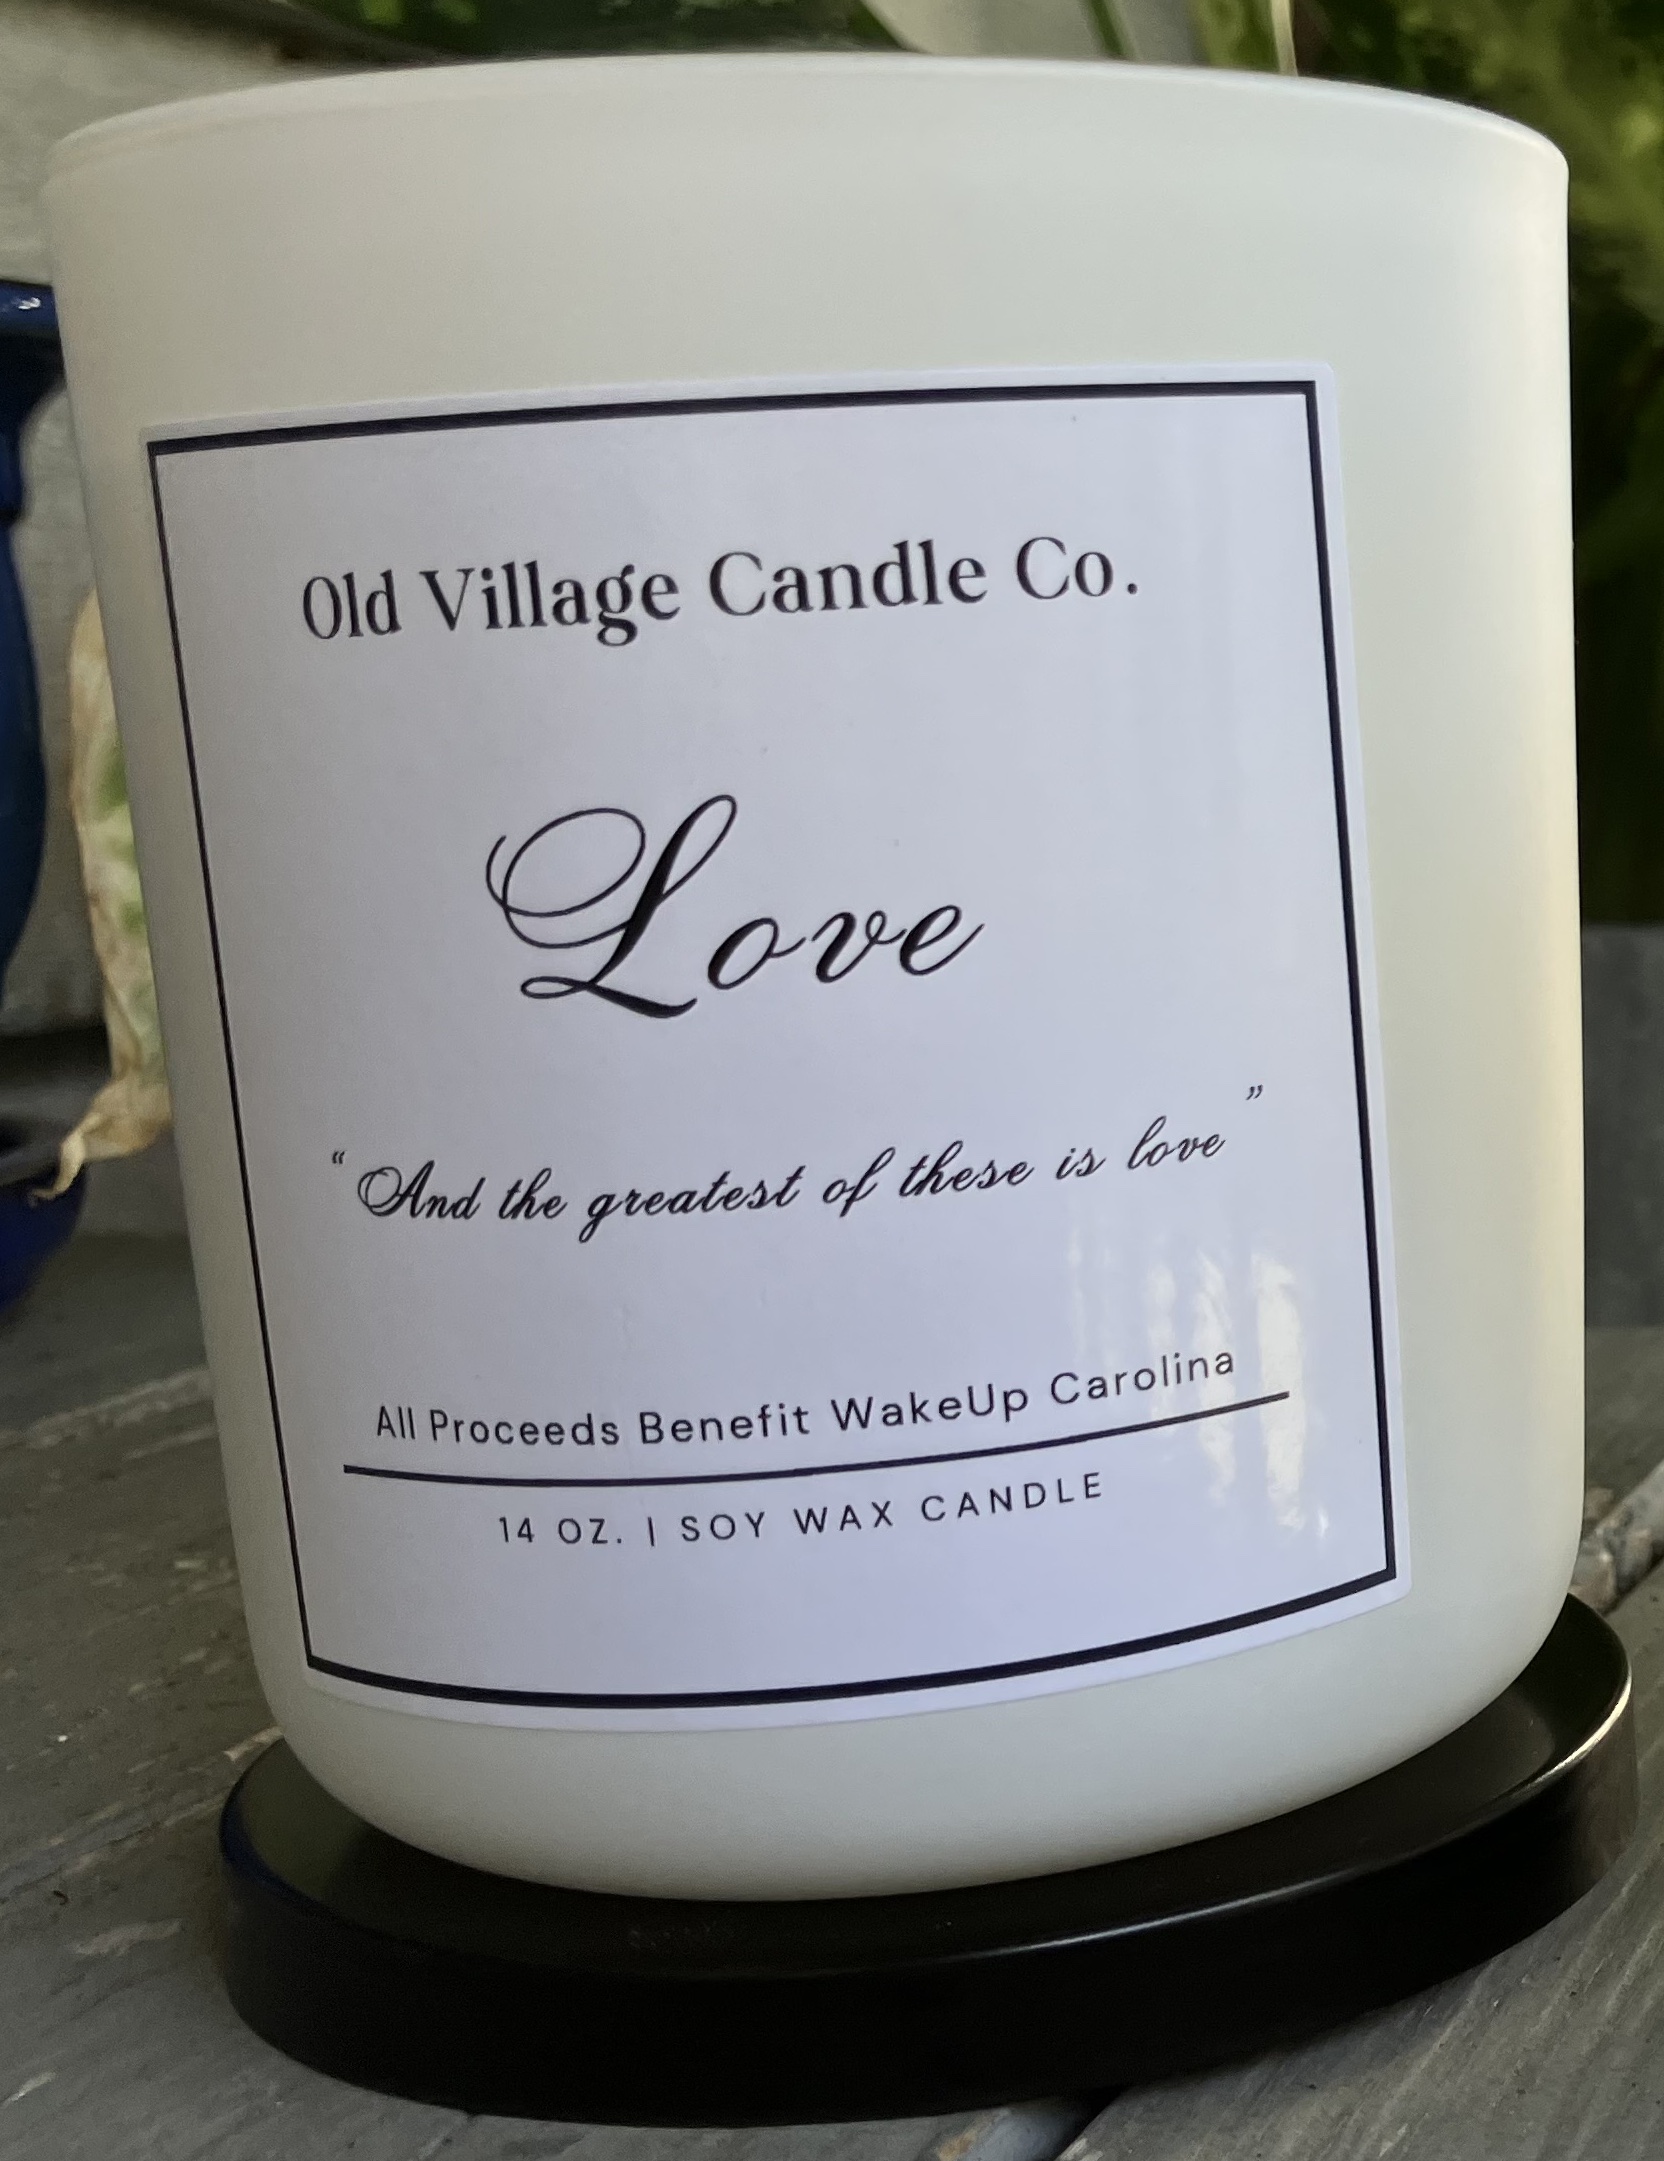 Love (Balsam Fir Scented Soy Candle) – Old Village Candle Co.